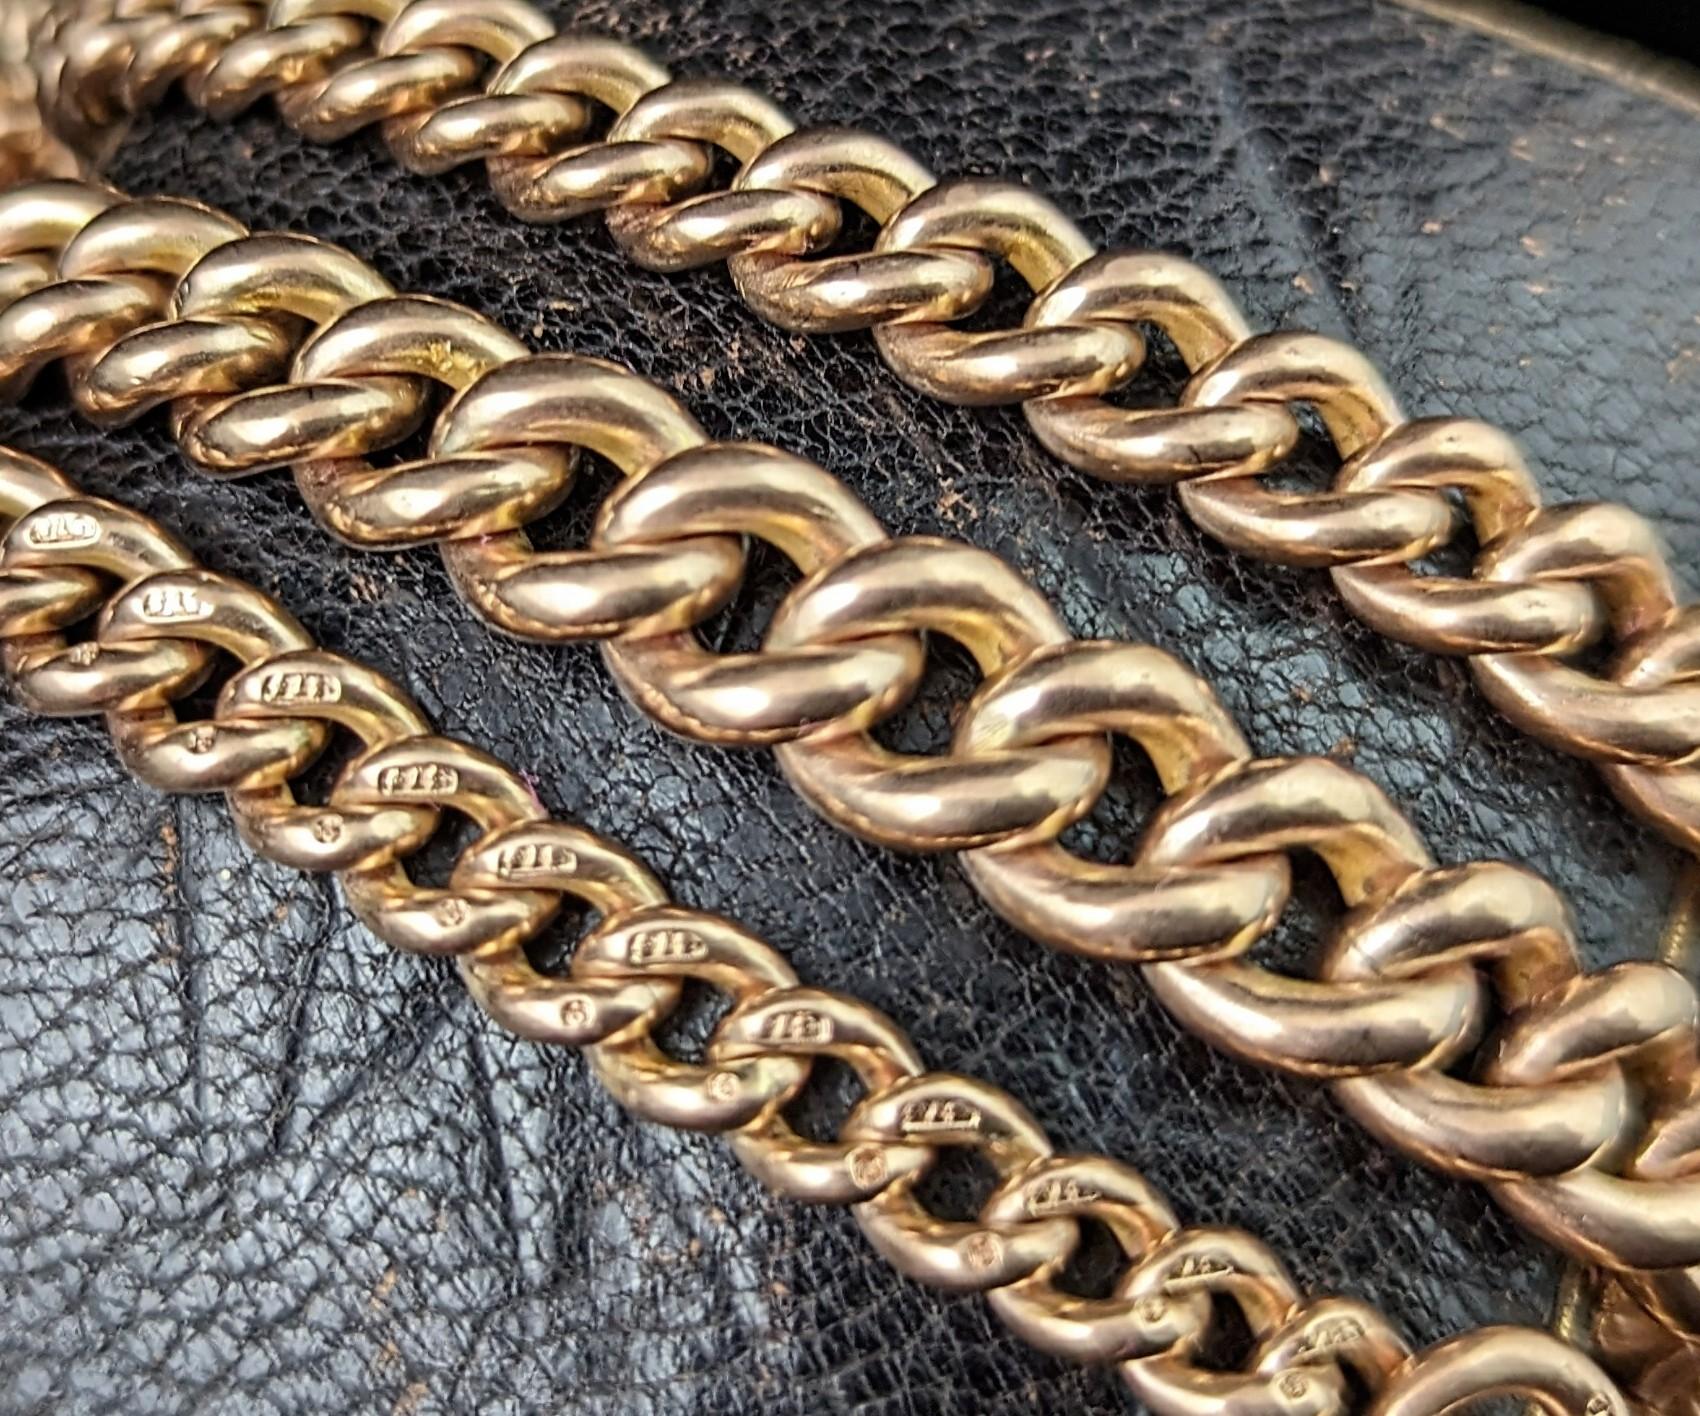 Antique 9k gold double Albert chain, watch chain necklace, Heavy  In Good Condition For Sale In NEWARK, GB